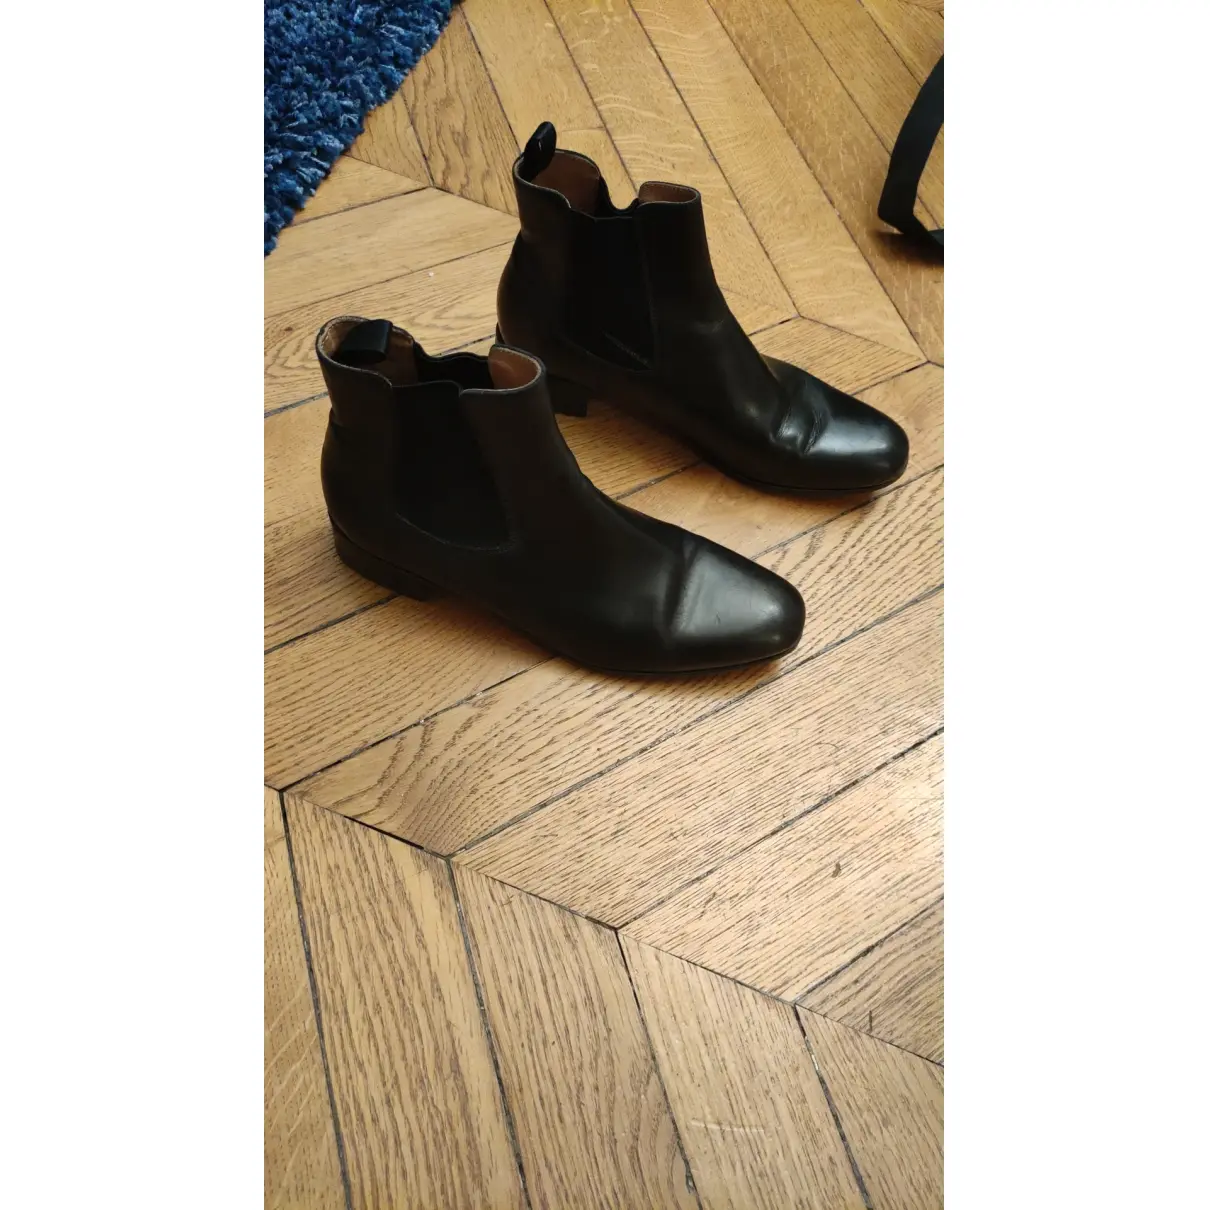 Buy Prada Leather ankle boots online